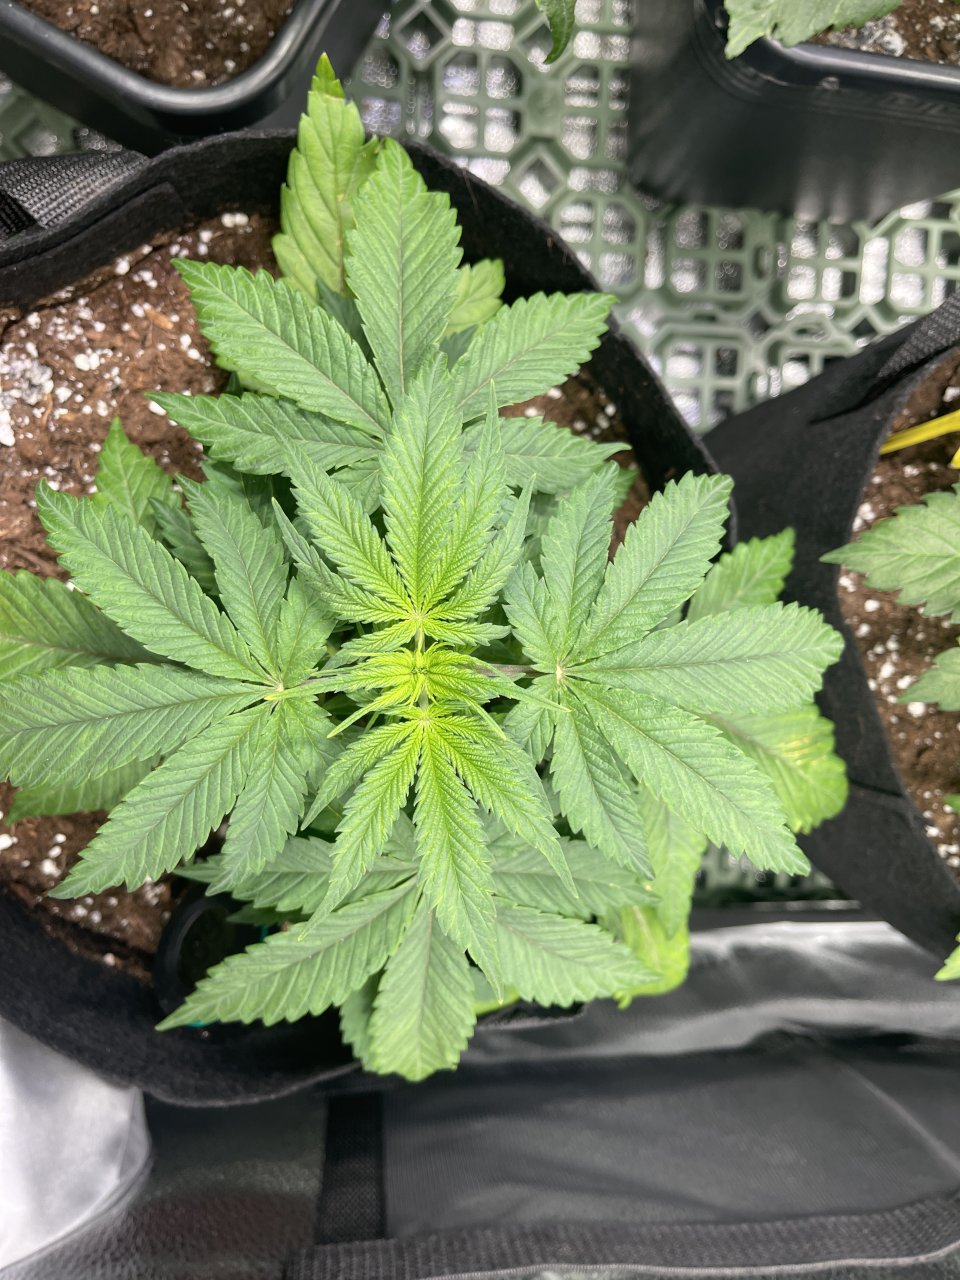 Critical Kush - day 29 - Top view